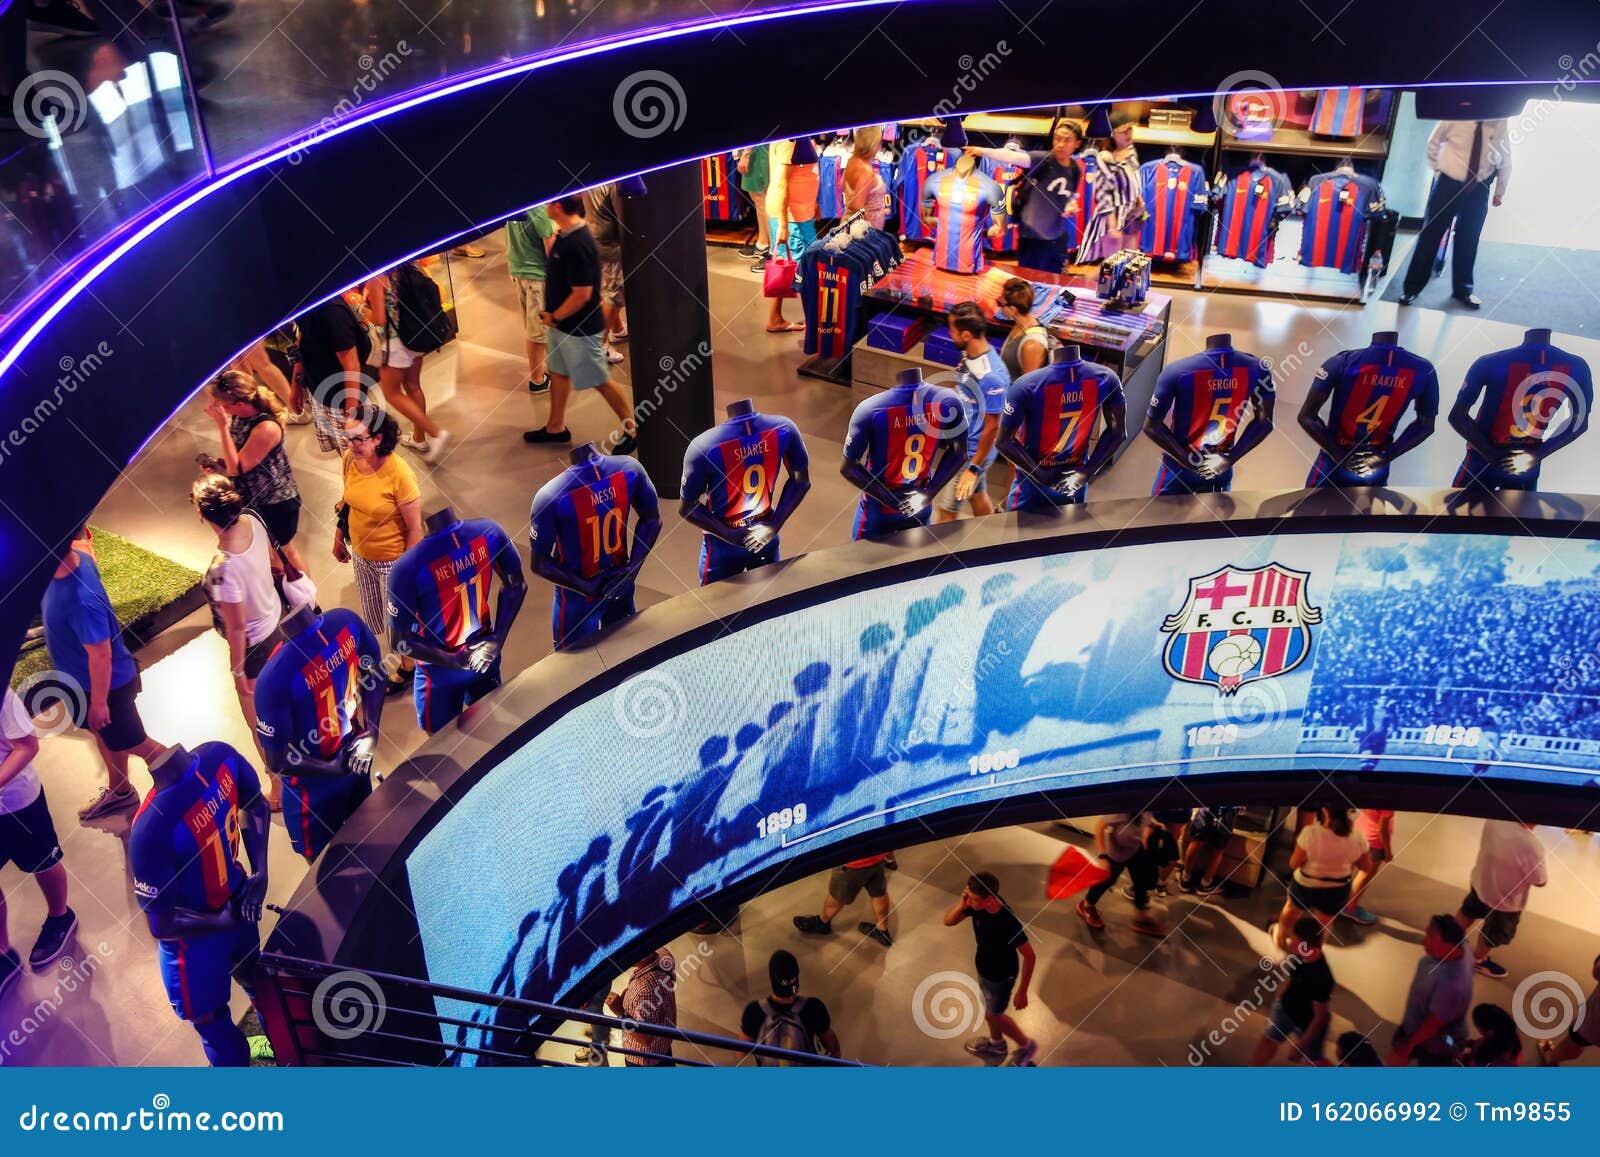 Barcelona, Spain July 5, 2019: Views of the Souvenir Shop at Camp Nou Stadium in Barcelona Editorial Photography - Image of installation, mediterranean: 162066992